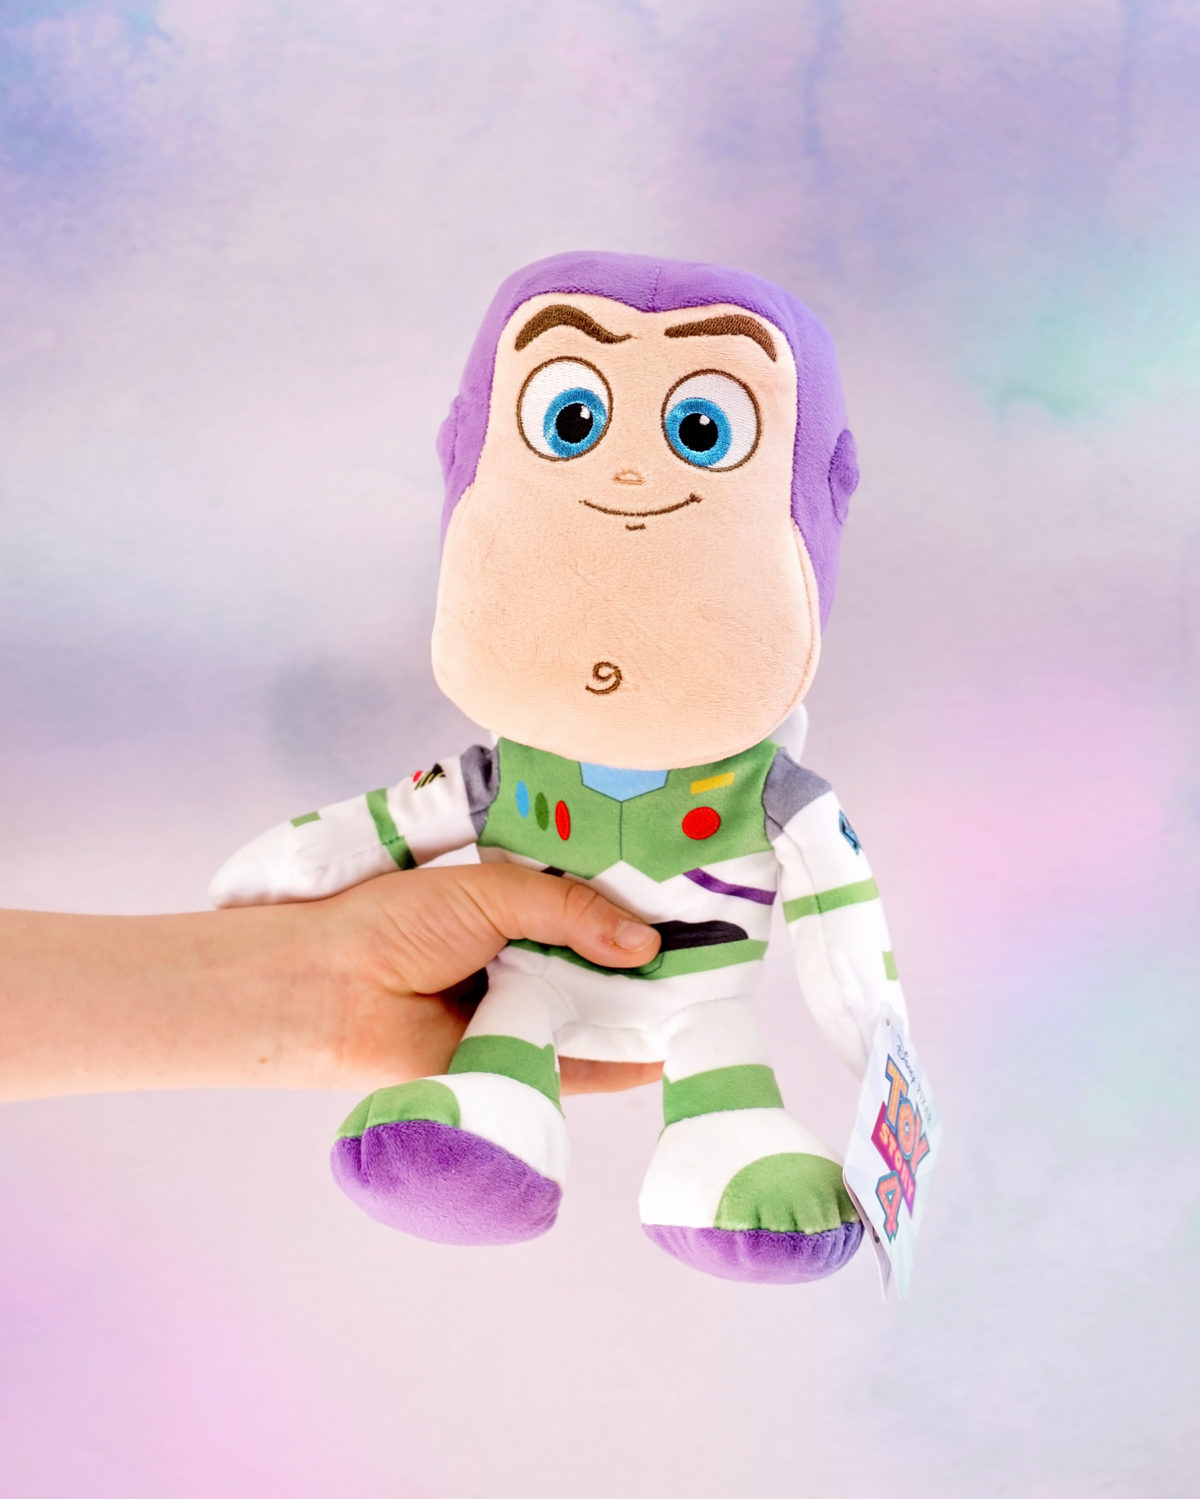 Image shows profile view of Disney Pixar's Toy Story Character Buzz Lightyear as a plush toy from SImba Toys. Image by Keep Up With The Jones Family. 